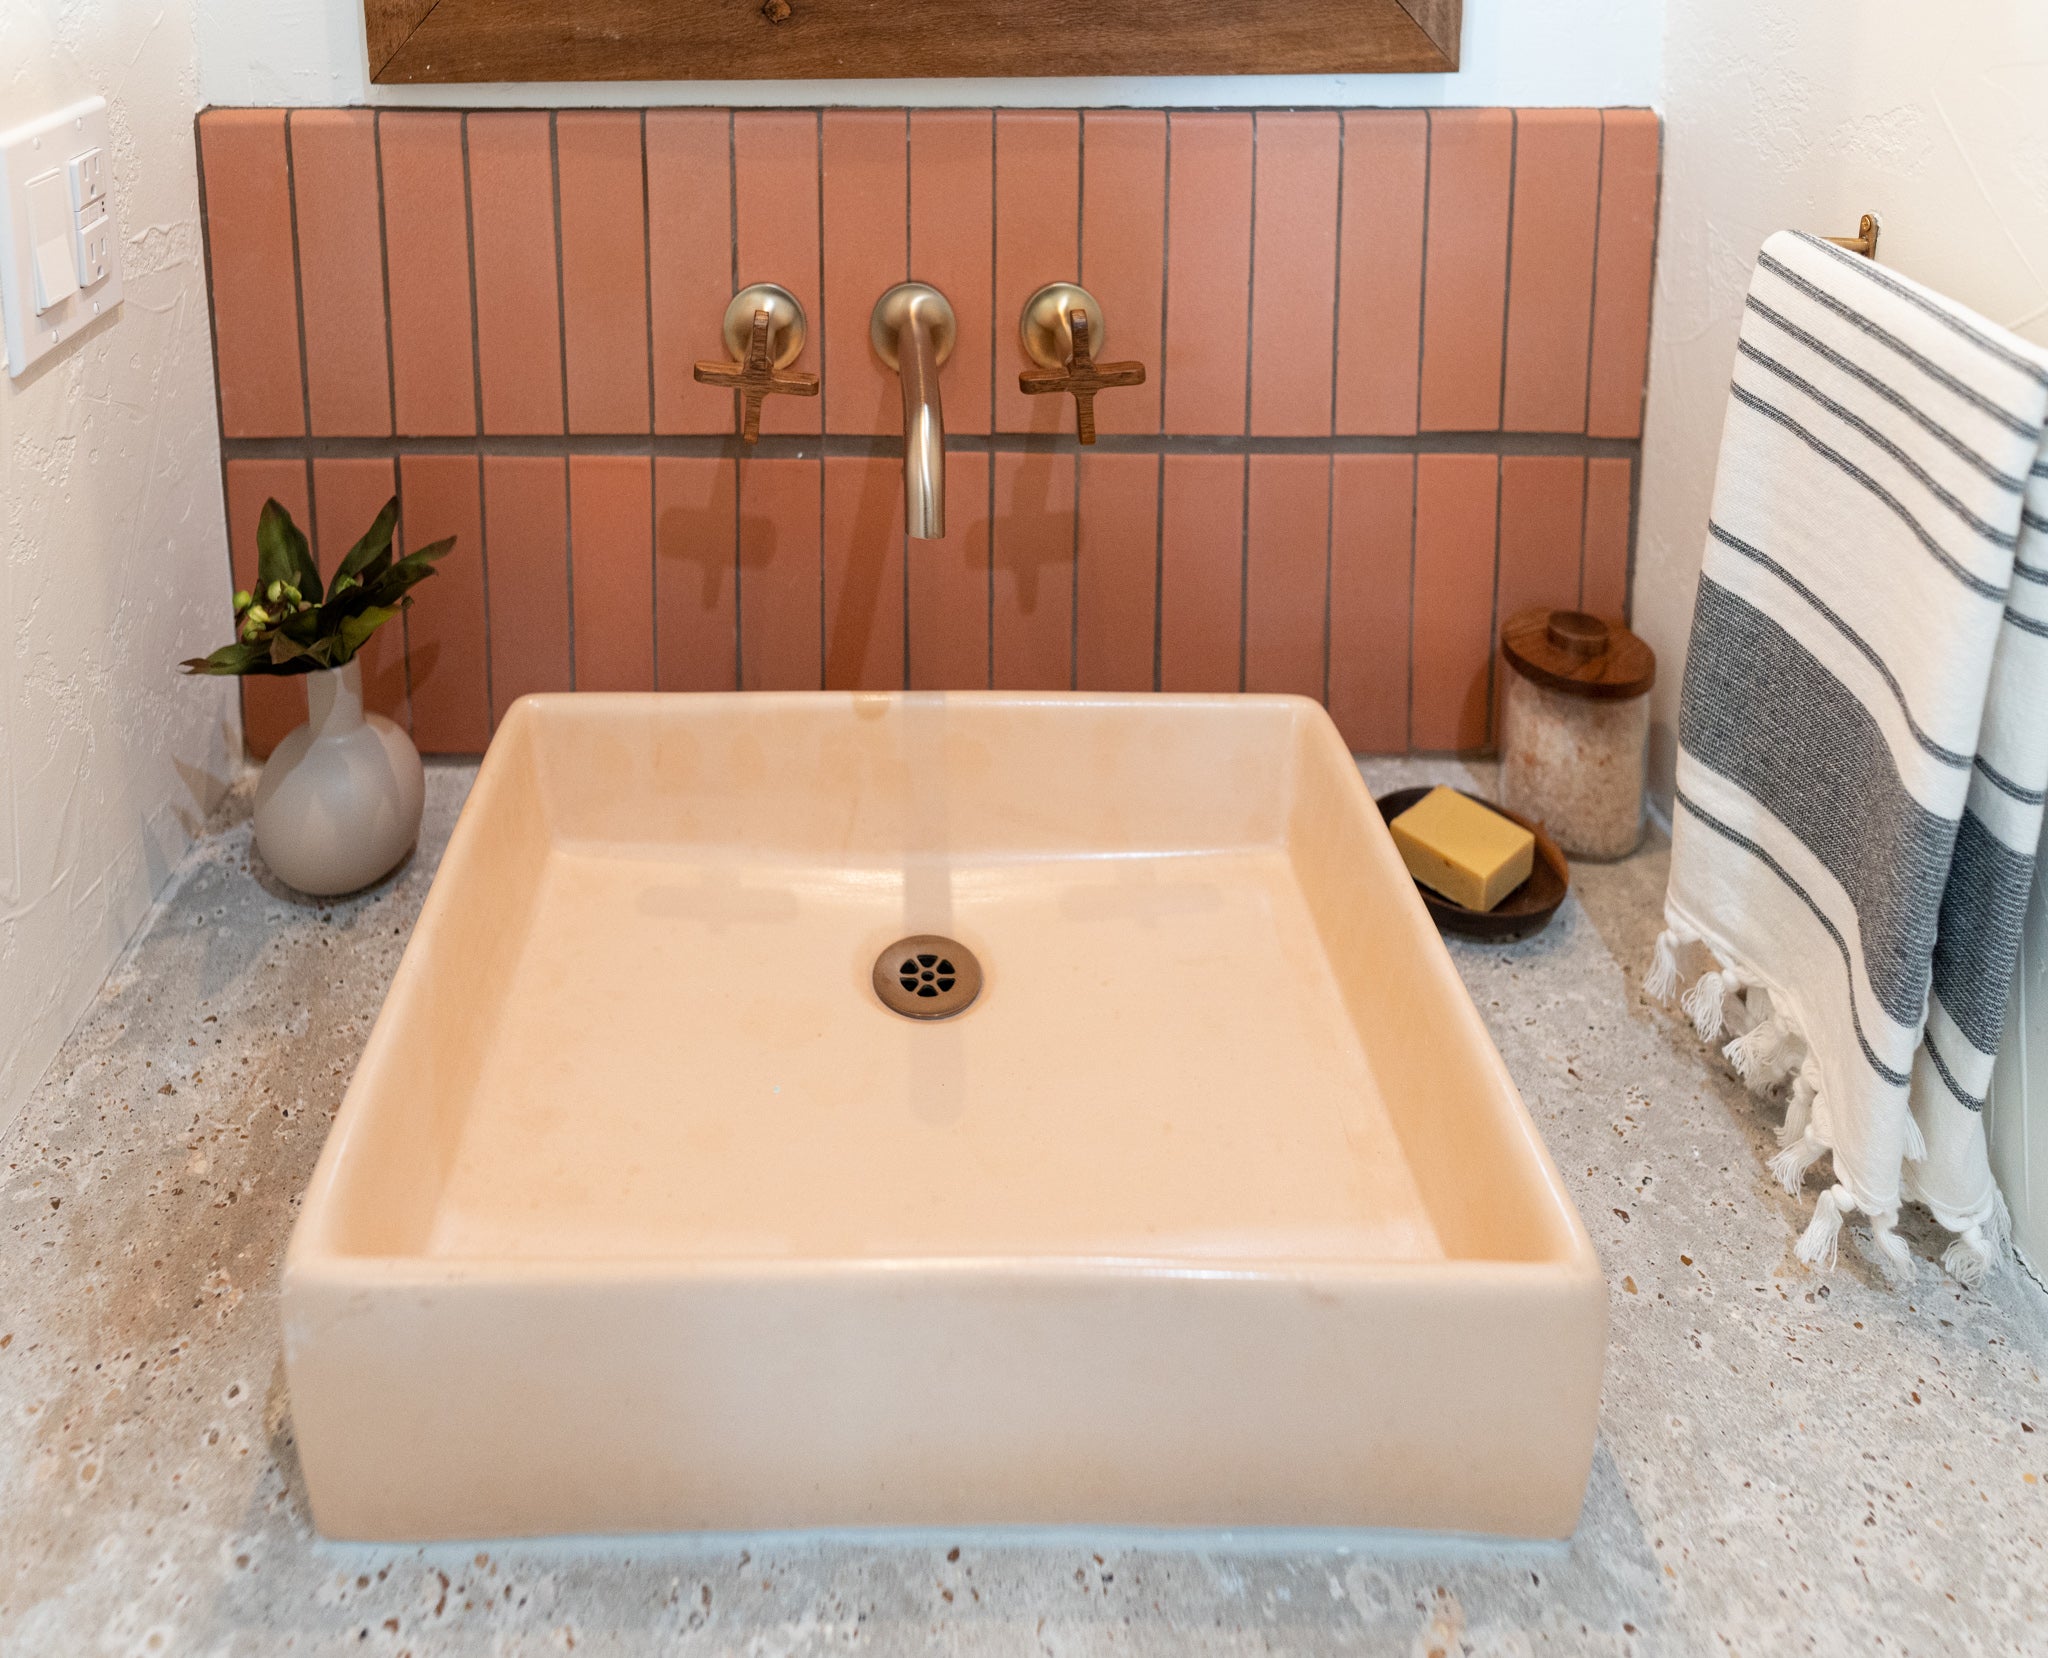 Bathroom sink with red tile and pink sink clay imports